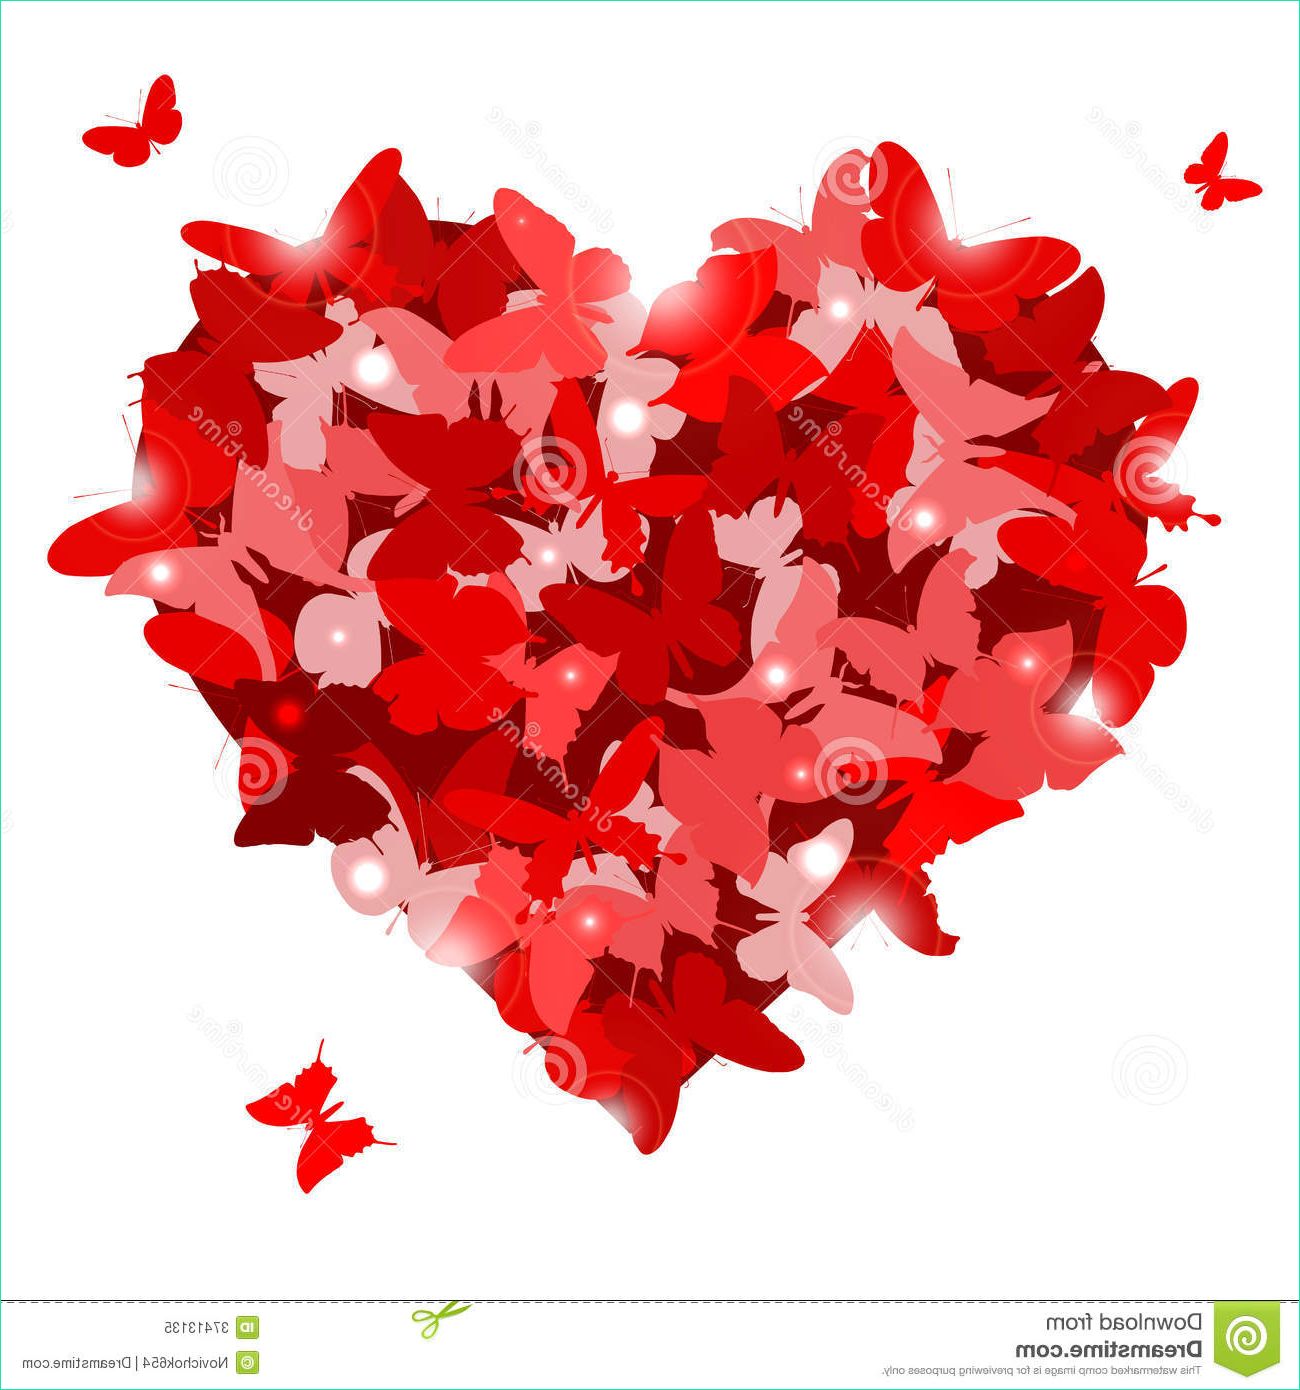 royalty free stock photo red heart butterflies valentine s day love concept vector illustration image